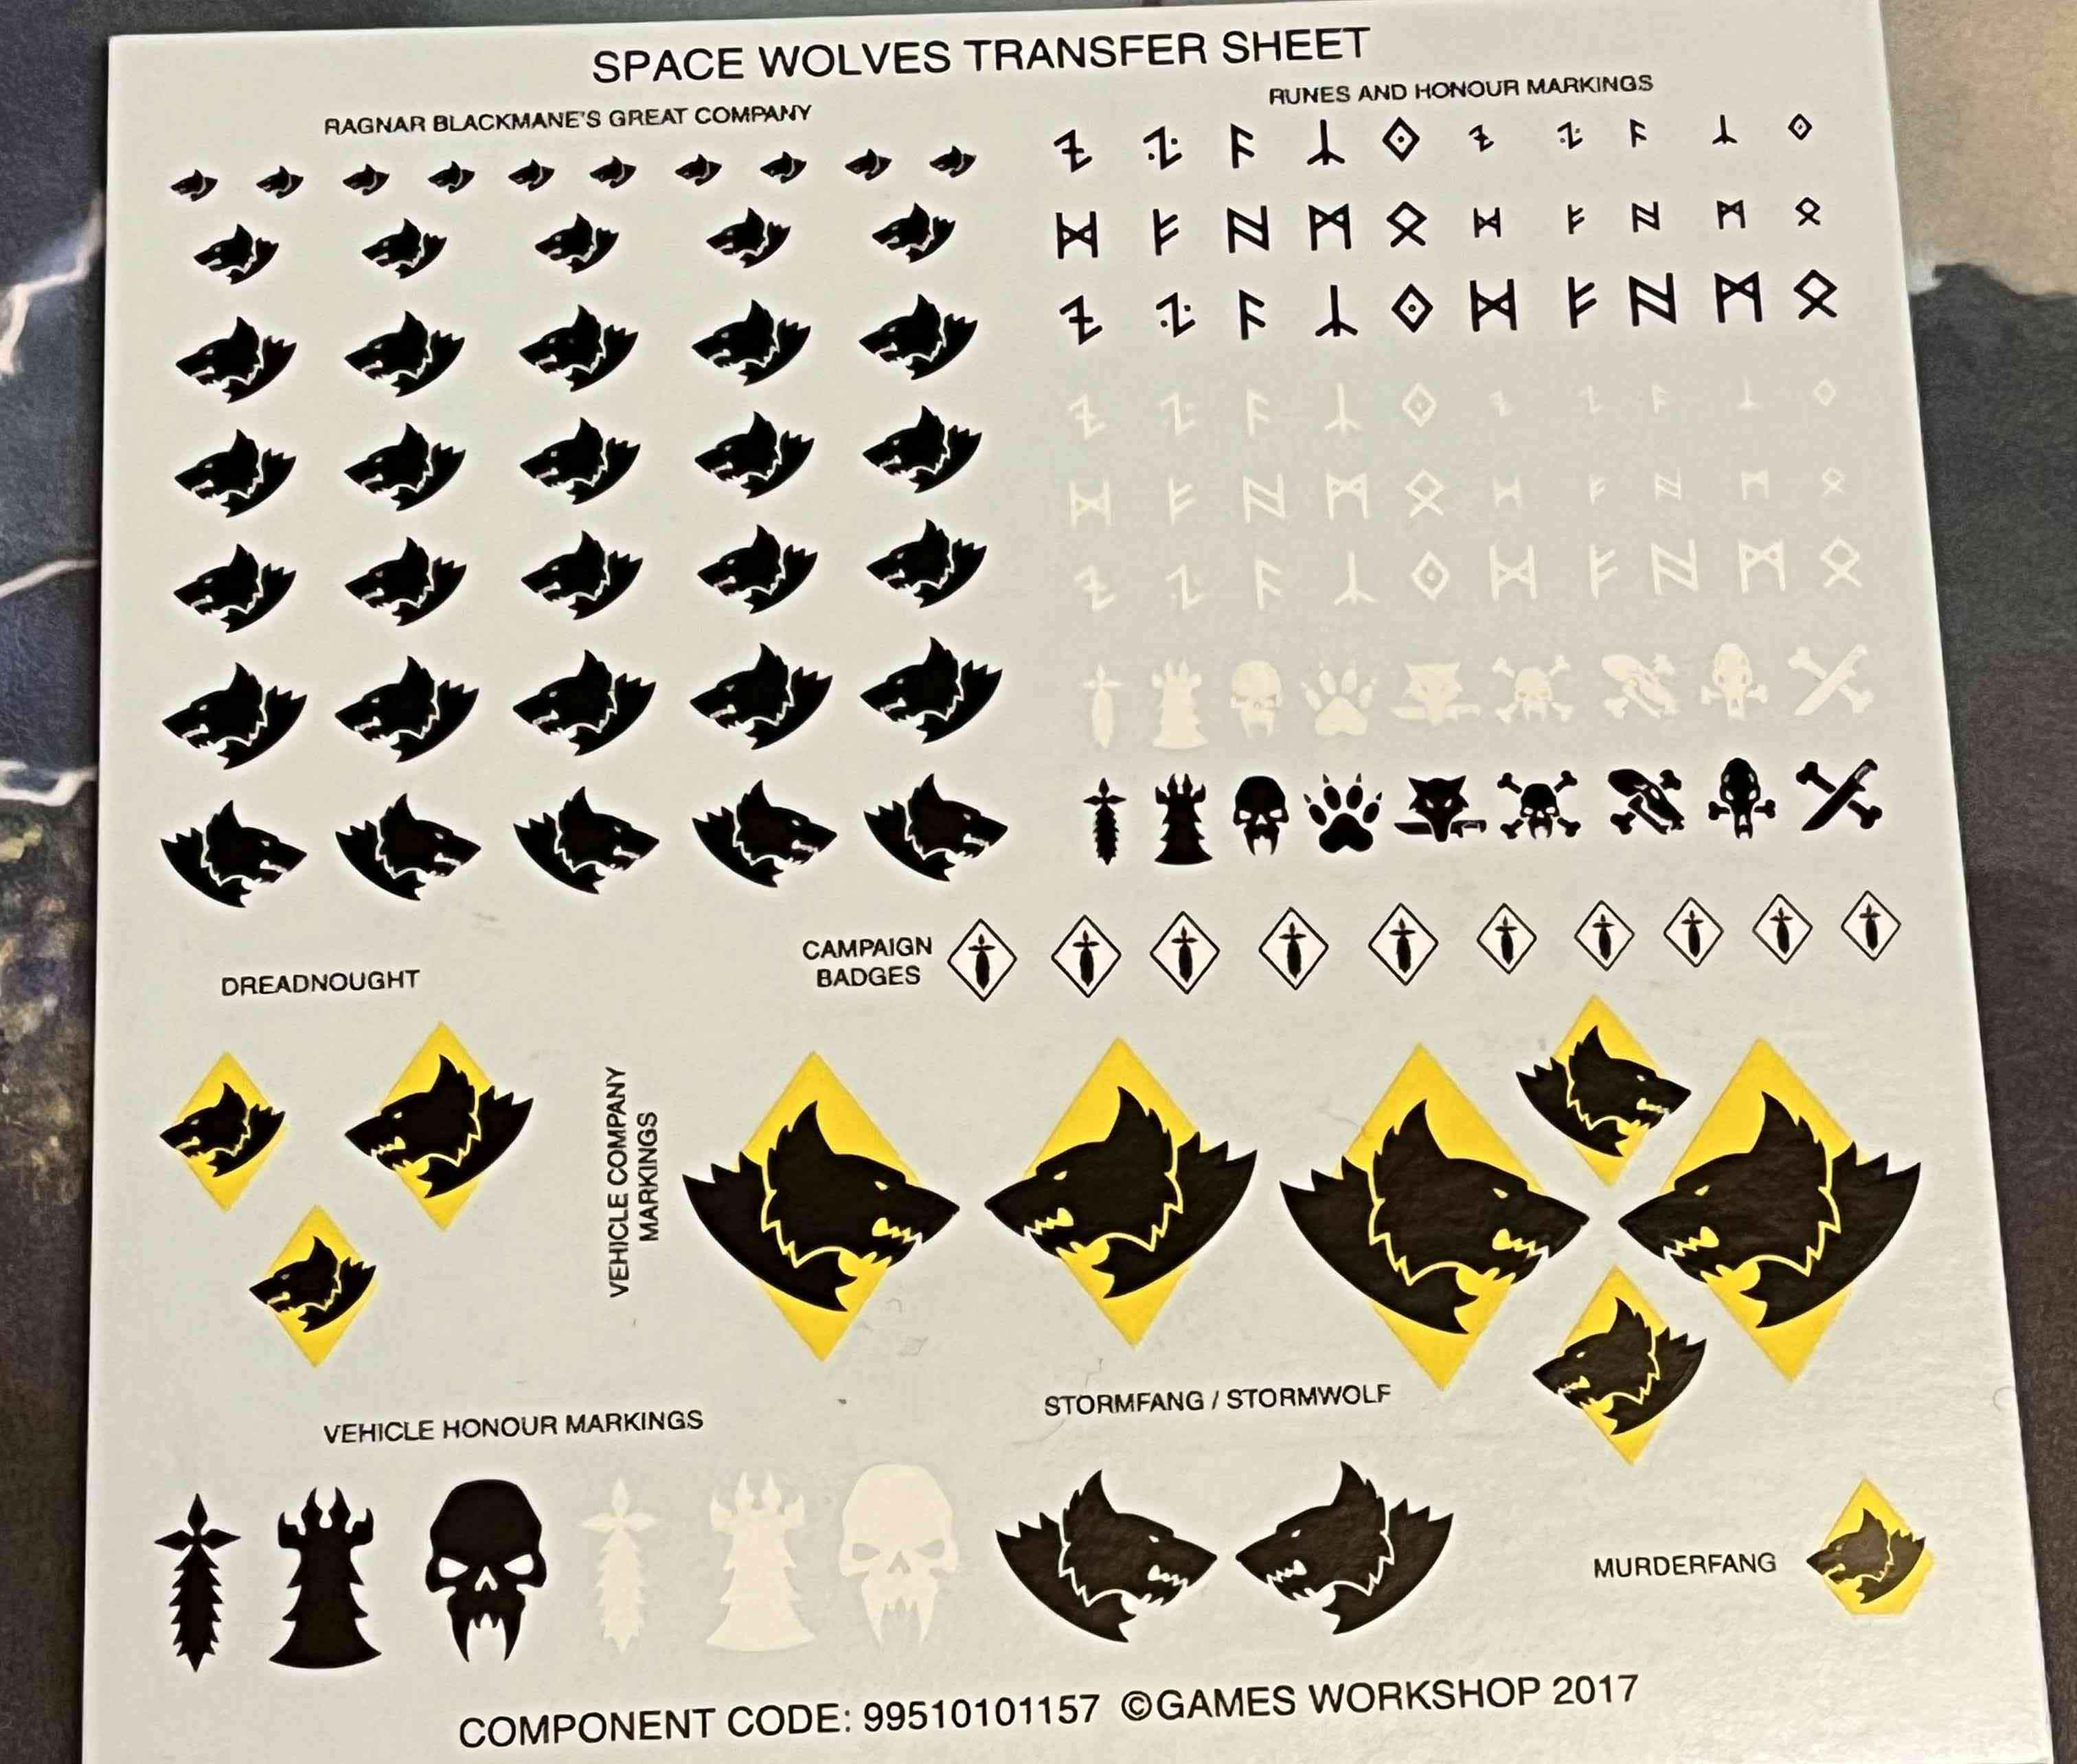 Space Wolves Decal Transfersheet